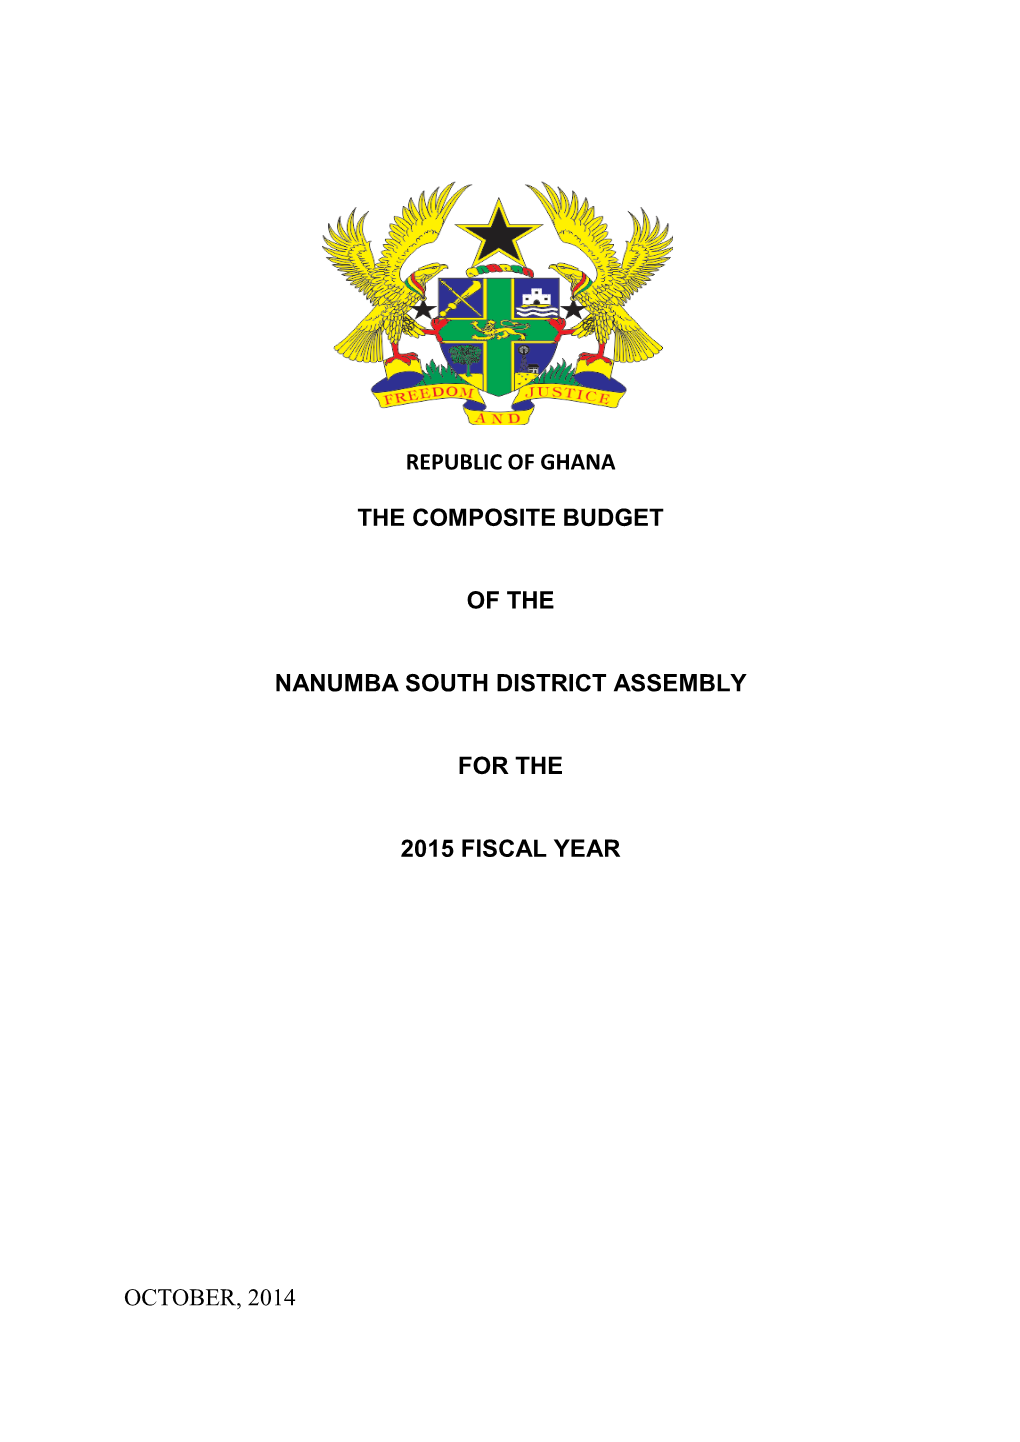 Republic of Ghana the Composite Budget of the Nanumba South District Assembly for the 2015 Fiscal Year October, 2014